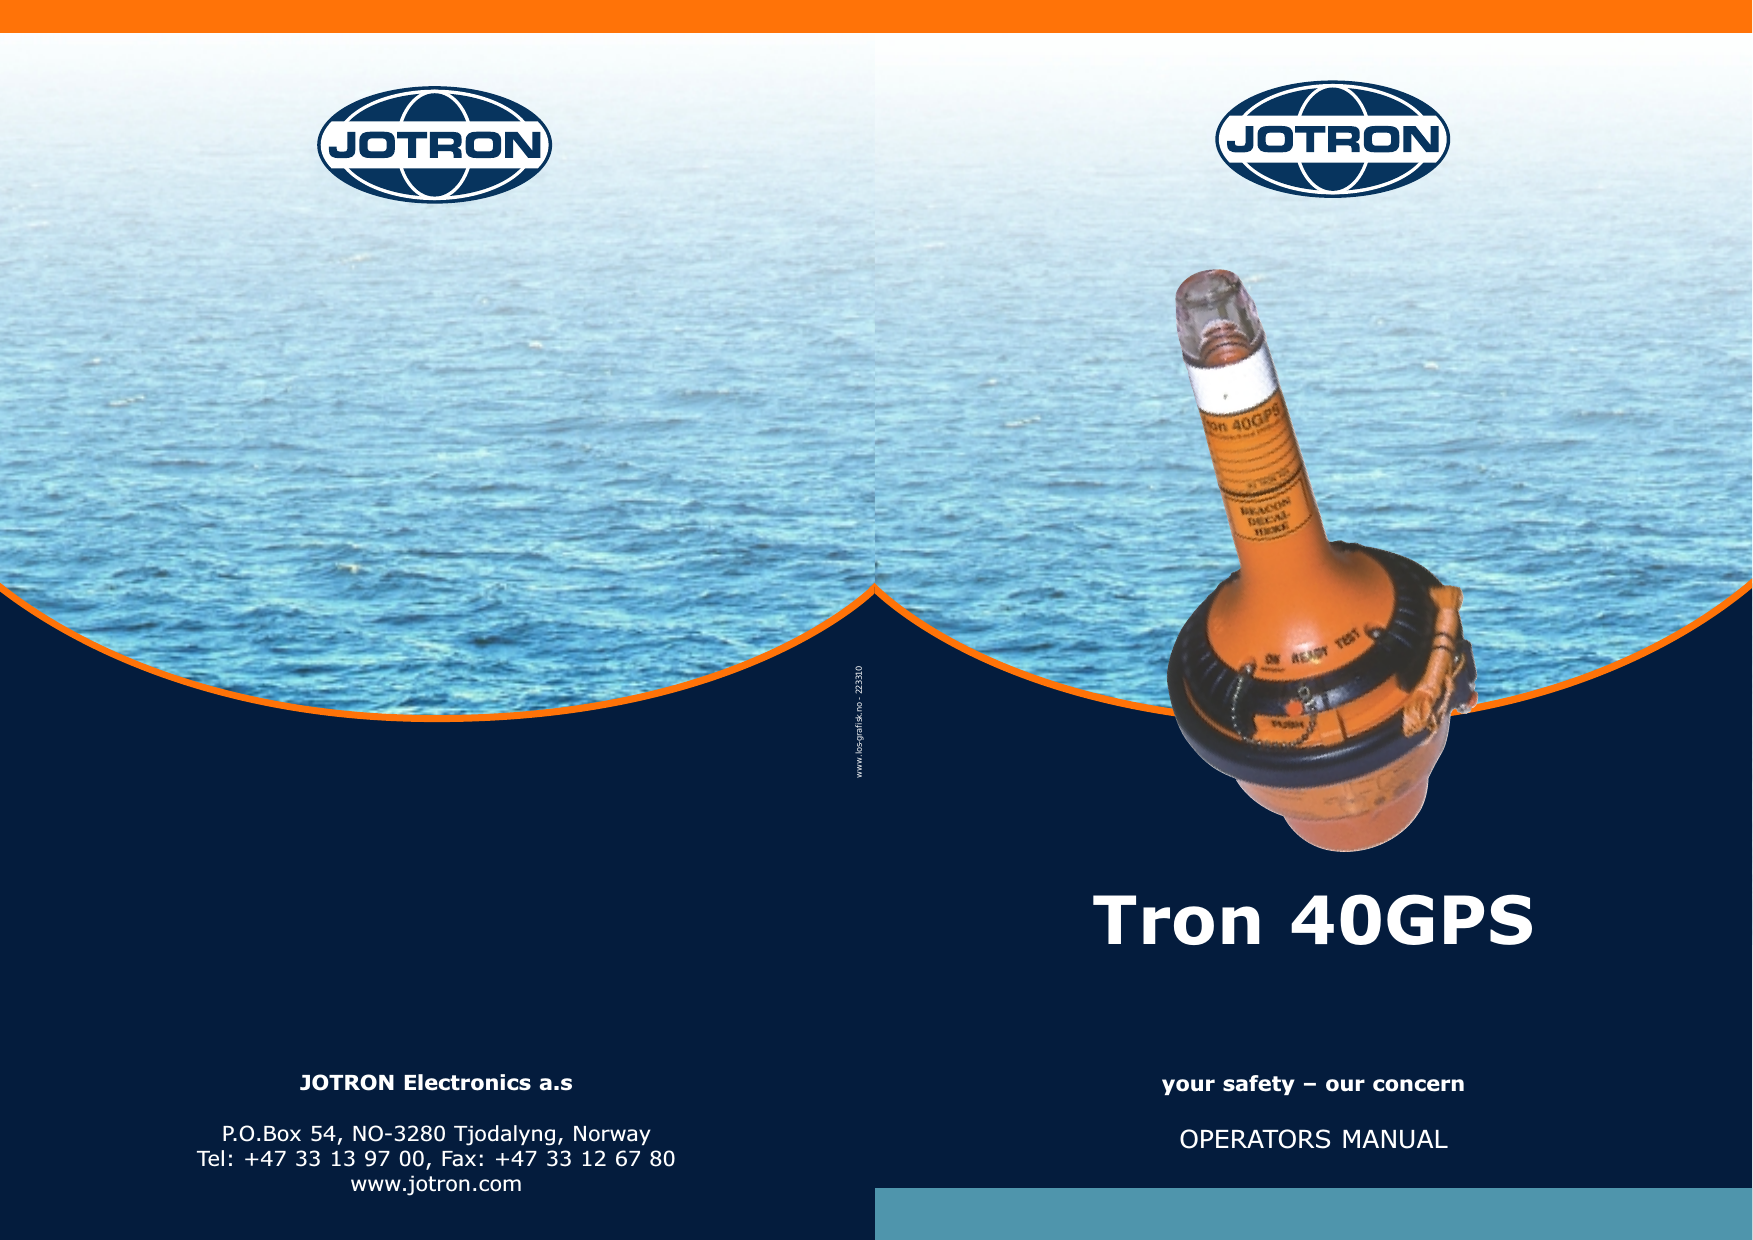 Tron 40GPSyour safety – our concernOPERATORS MANUALJOTRON Electronics a.sP.O.Box 54, NO-3280 Tjodalyng, NorwayTel: +47 33 13 97 00, Fax: +47 33 12 67 80www.jotron.comwww.los-grafisk.no - 223310